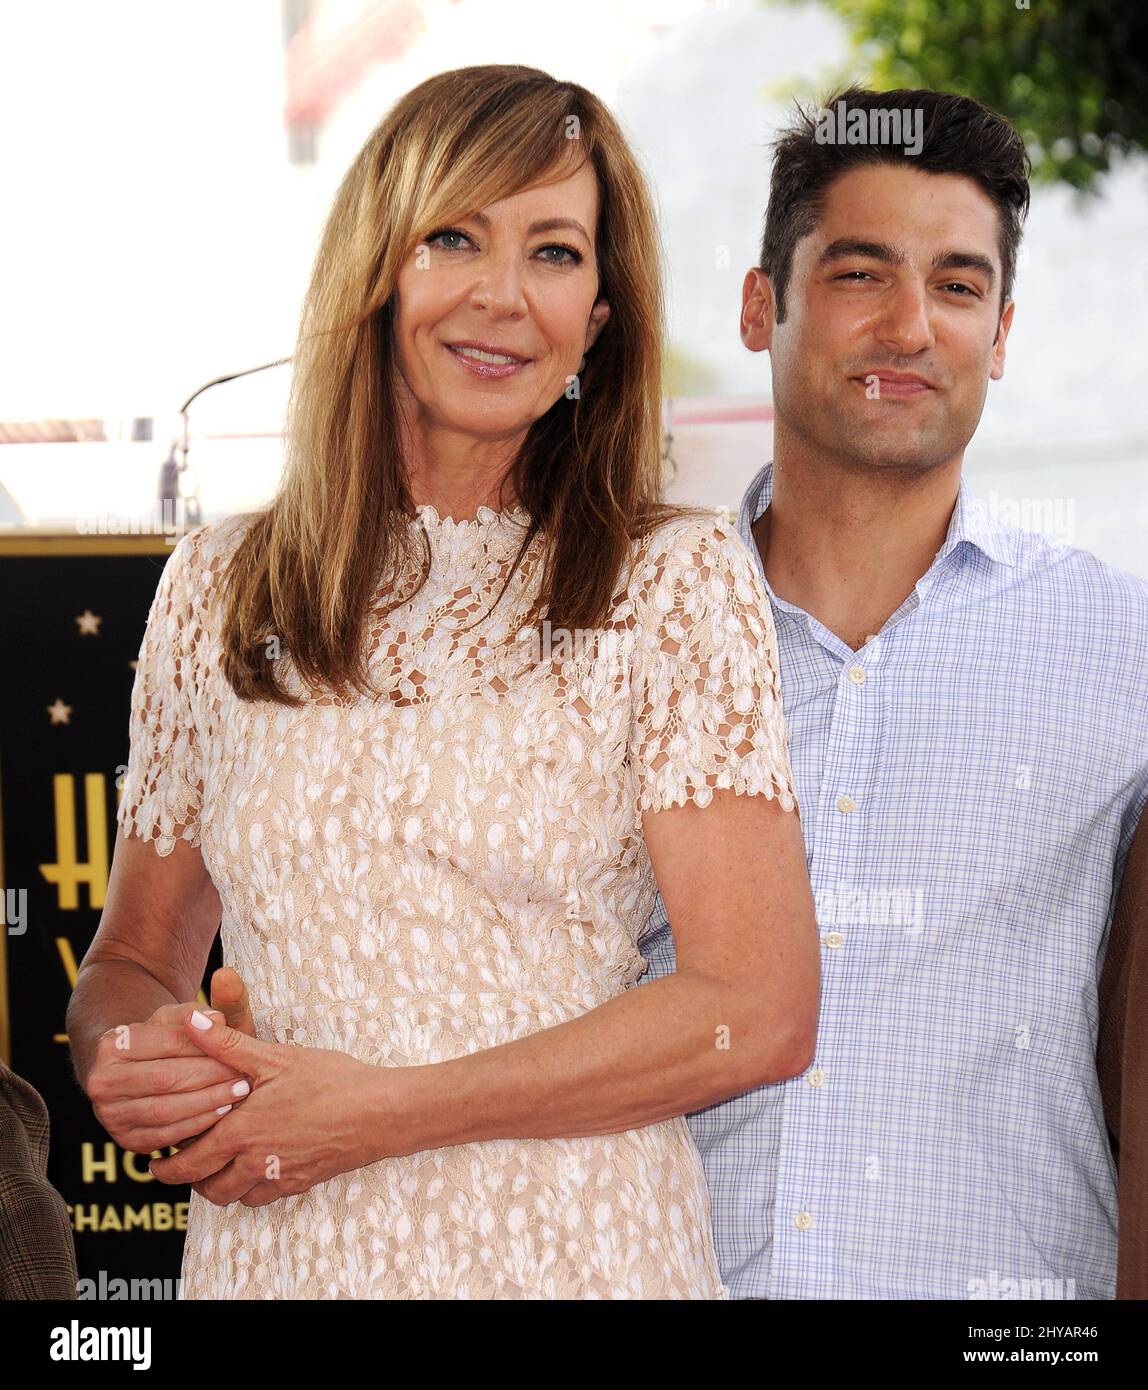 Allison Janney, Philip Joncas attending Alison Janney's Hollywood star walk of fame ceremony in Los Angeles, California. Stock Photo